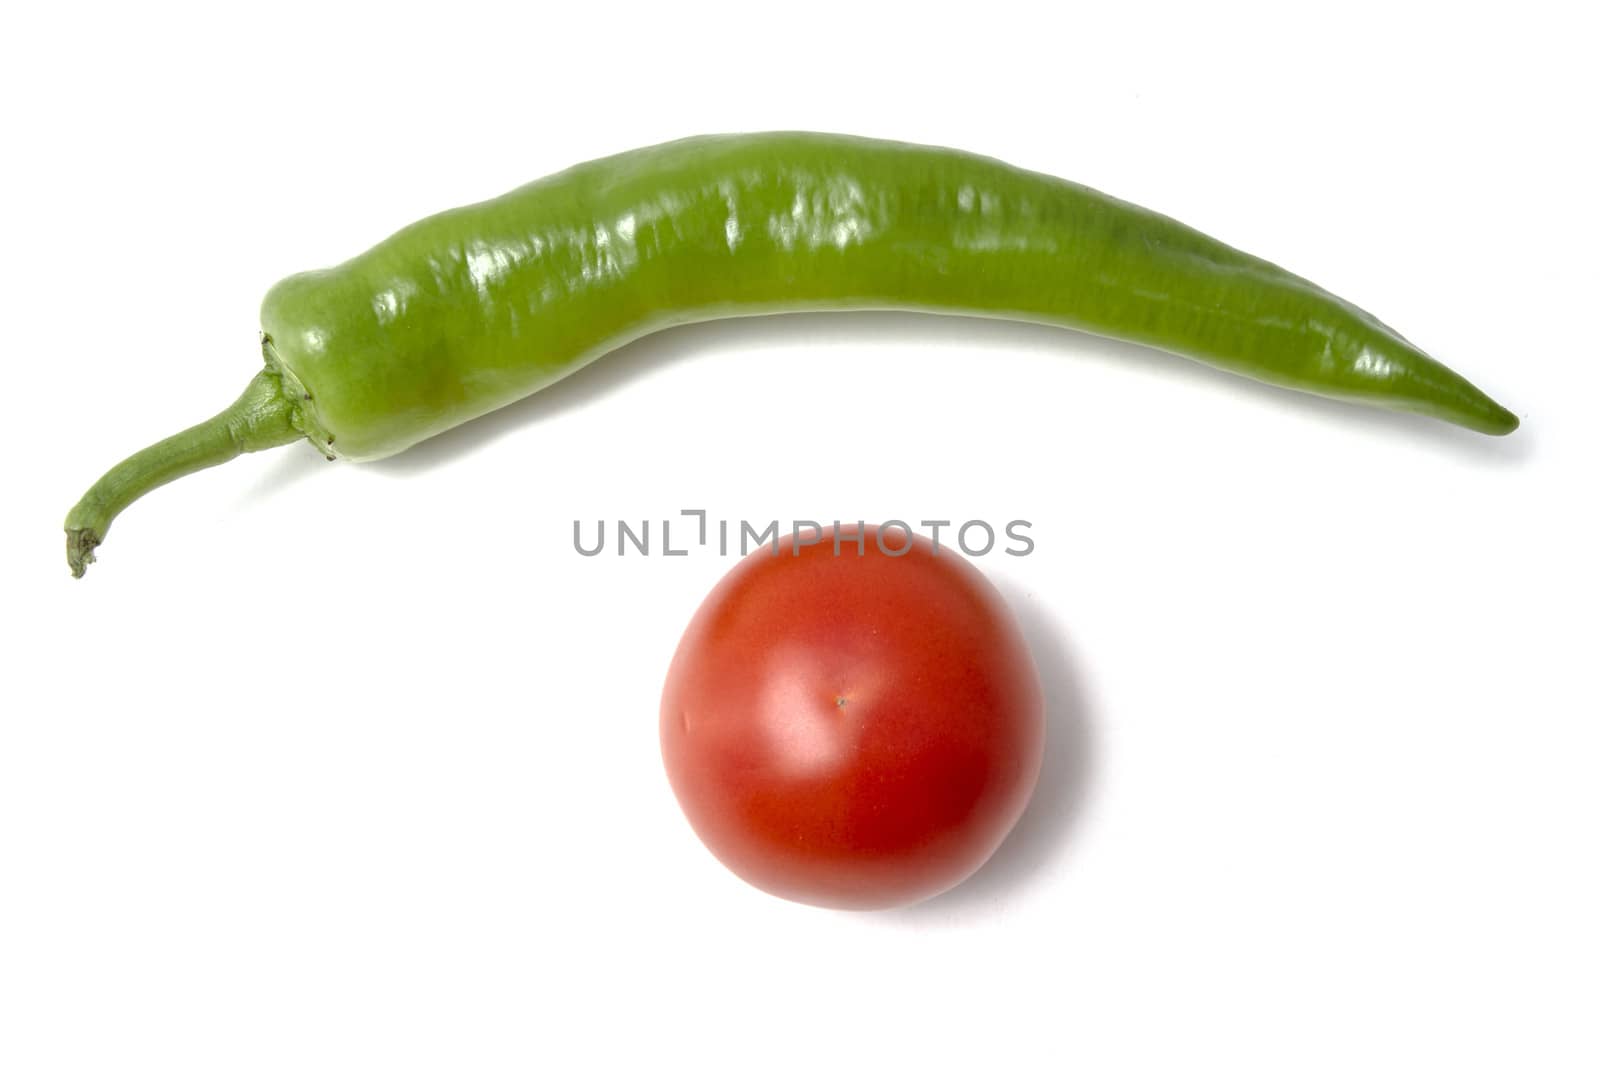 Red tamato and green pepper closeup on white background